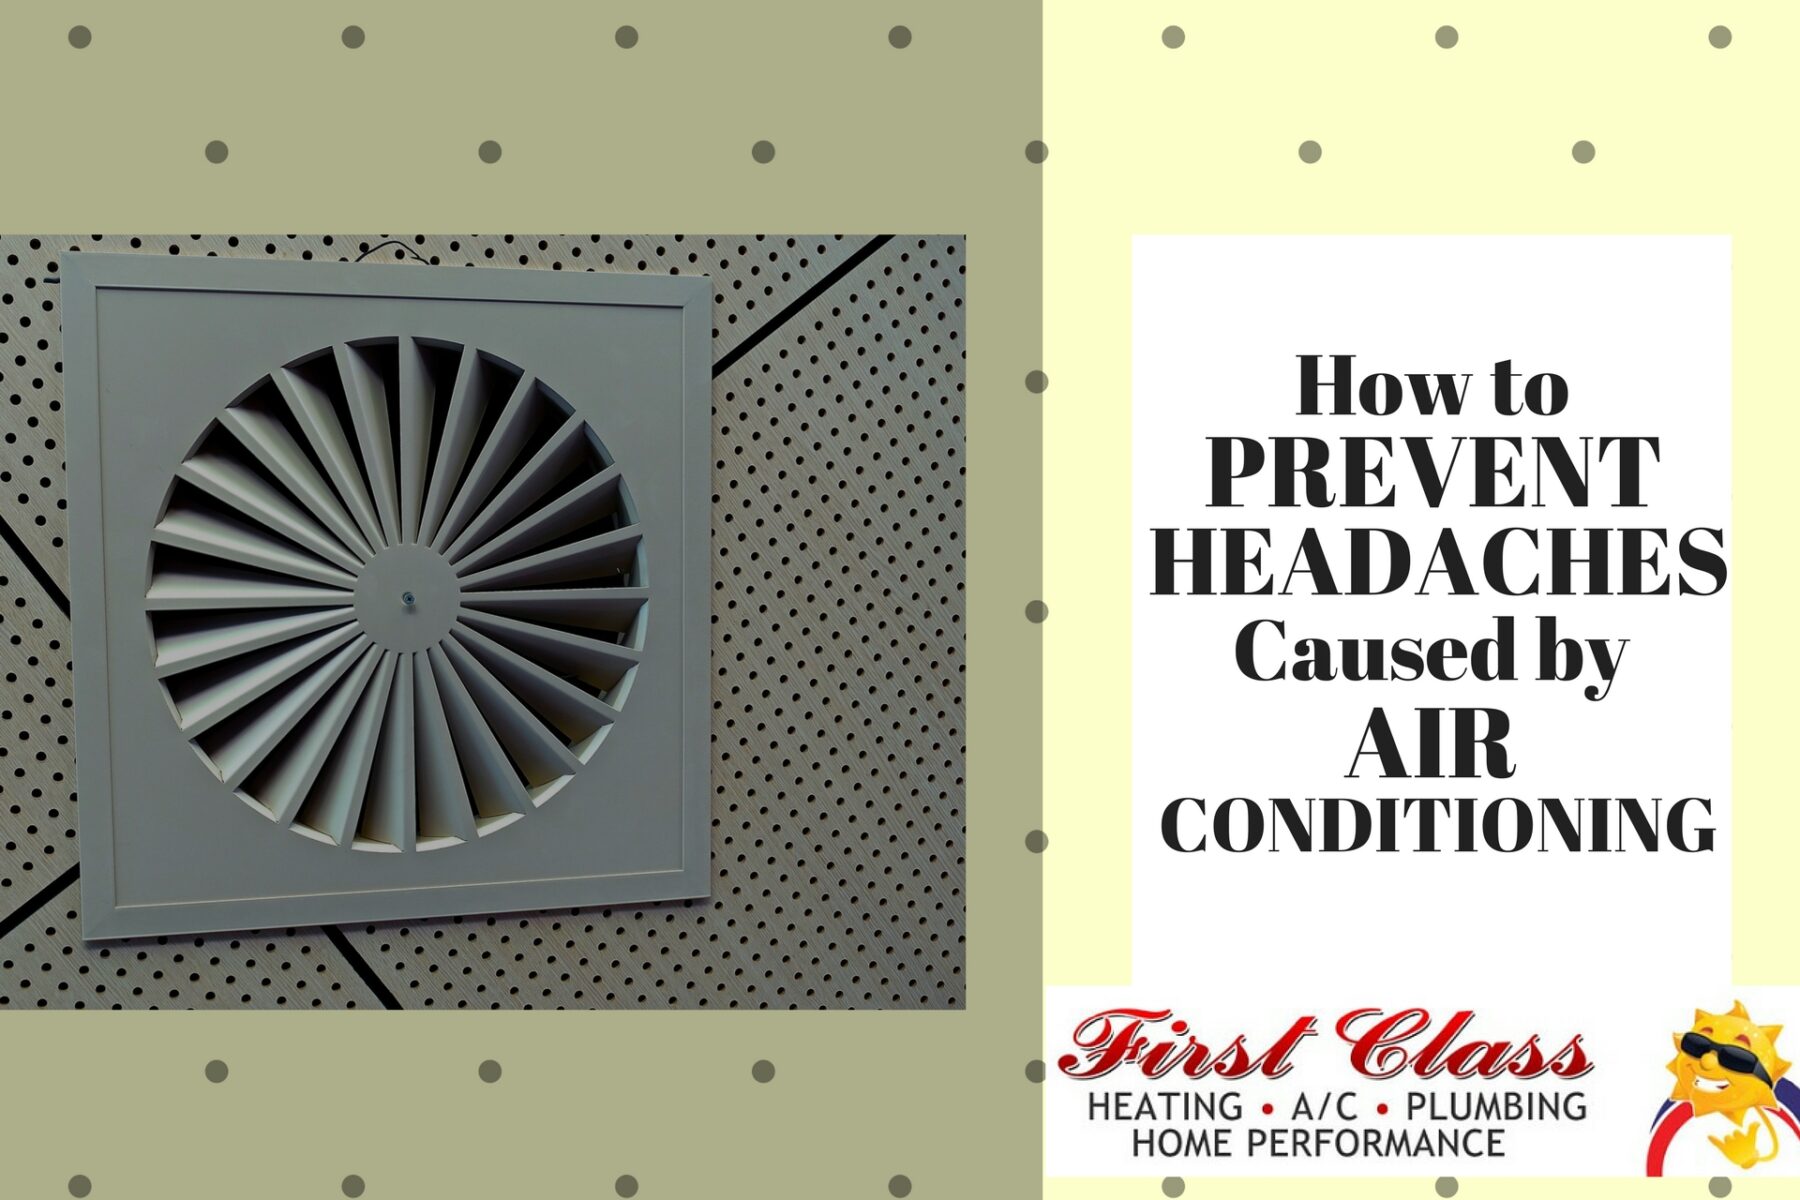 How to Prevent Headaches Caused by Air Conditioning